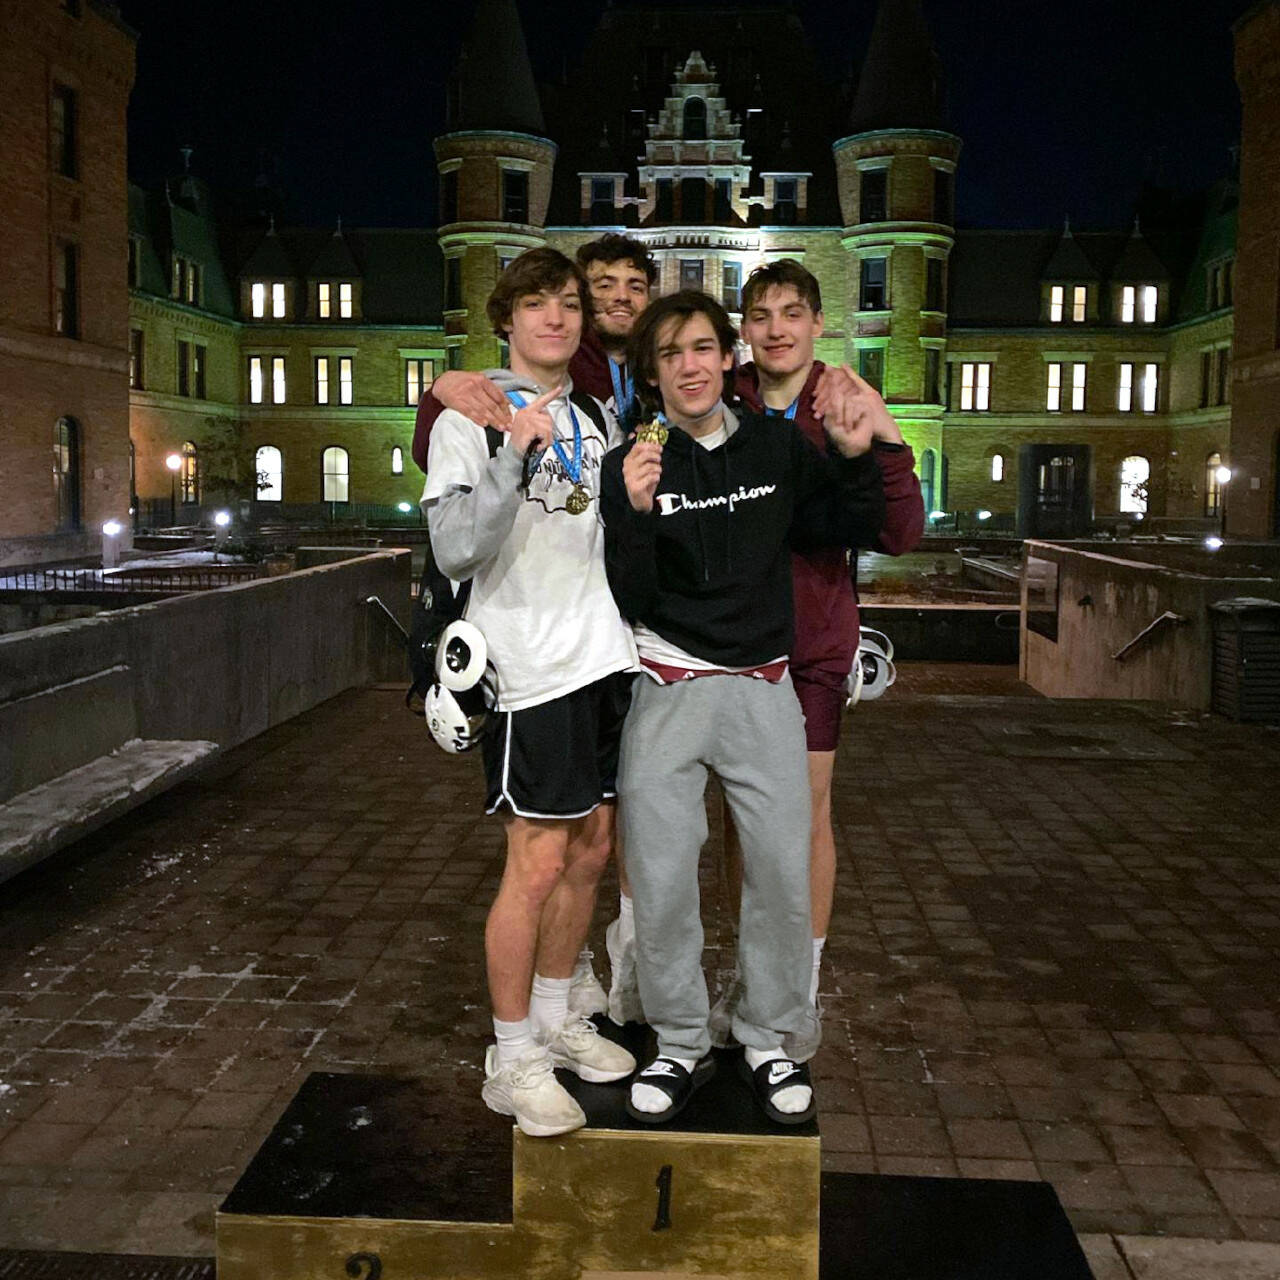 SUBMITTED PHOTO Montesano wrestlers (from left) Cole Ekerson, Mateo Sanchez, Sean Ryker and Gage Stutesman each won their respective weight classes at the King of the Castle boys wrestling tournament on Wednesday at Stadium High School in Tacoma.